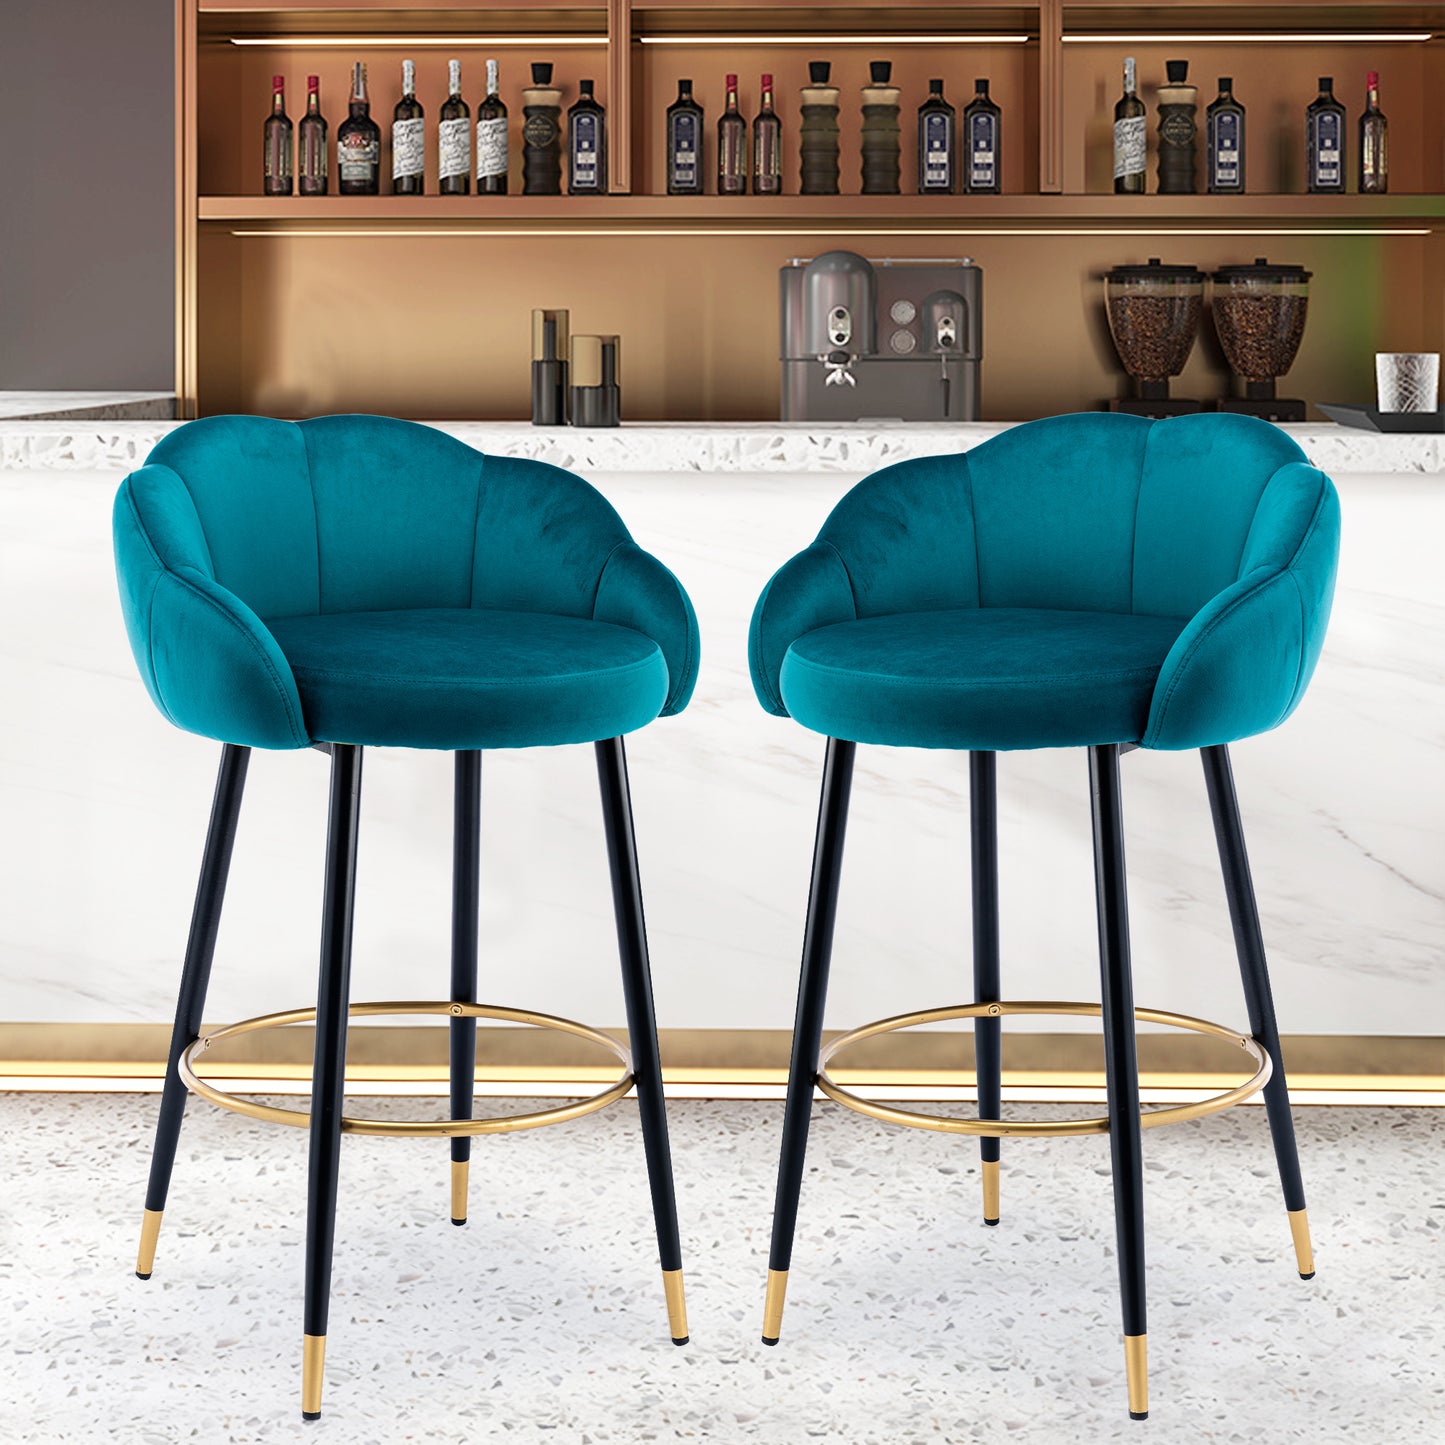 Bar Stools with Back and Footrest Counter Height Dining Chairs, set of 2